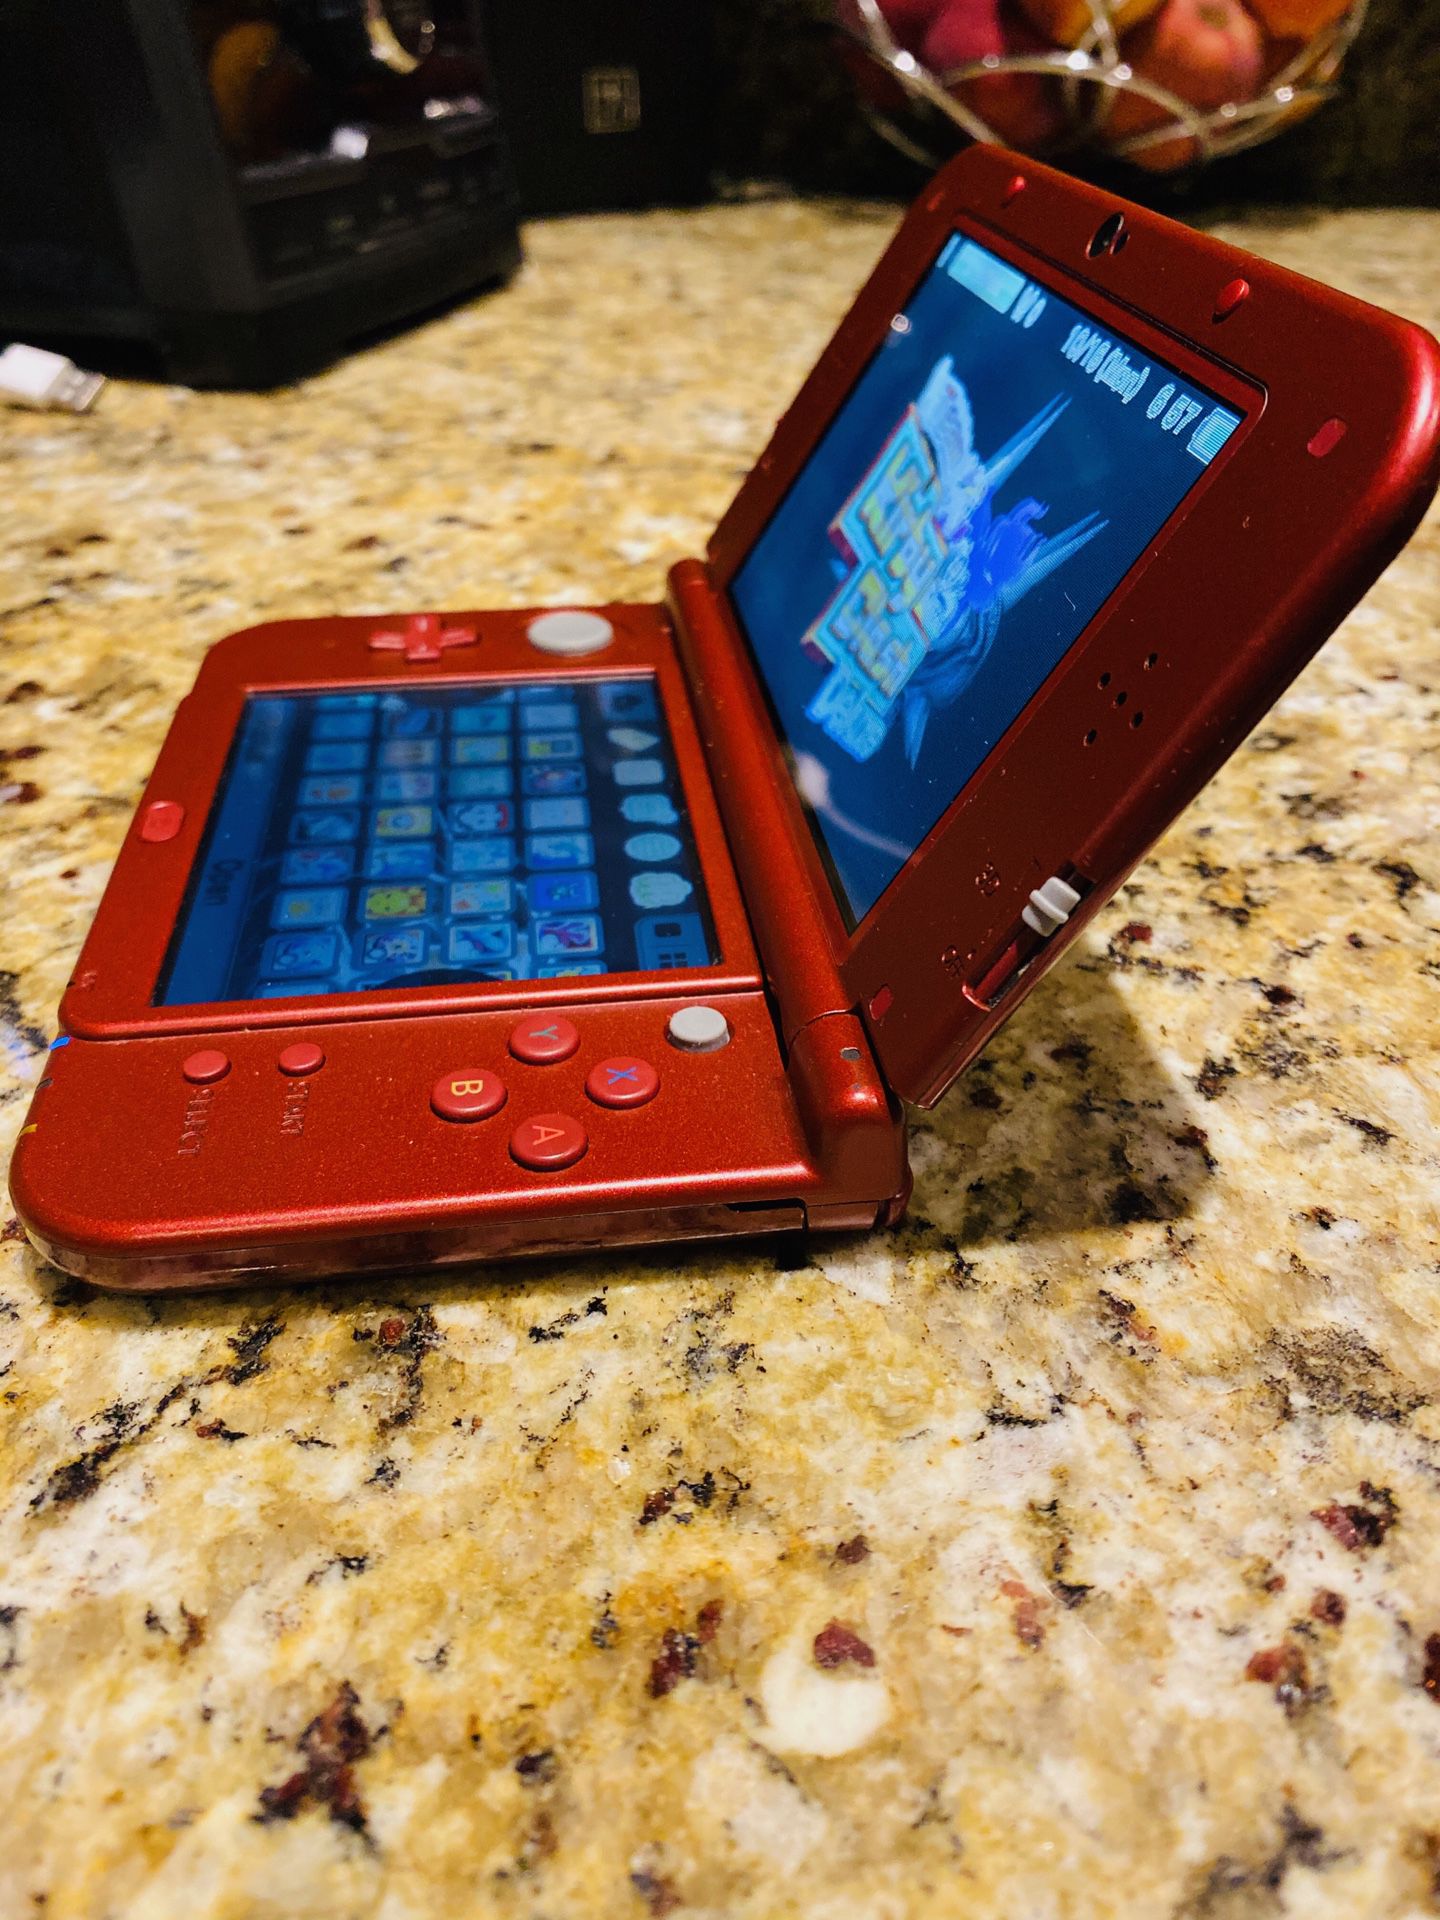 Nintendo 3Ds xl with 600 games downloaded